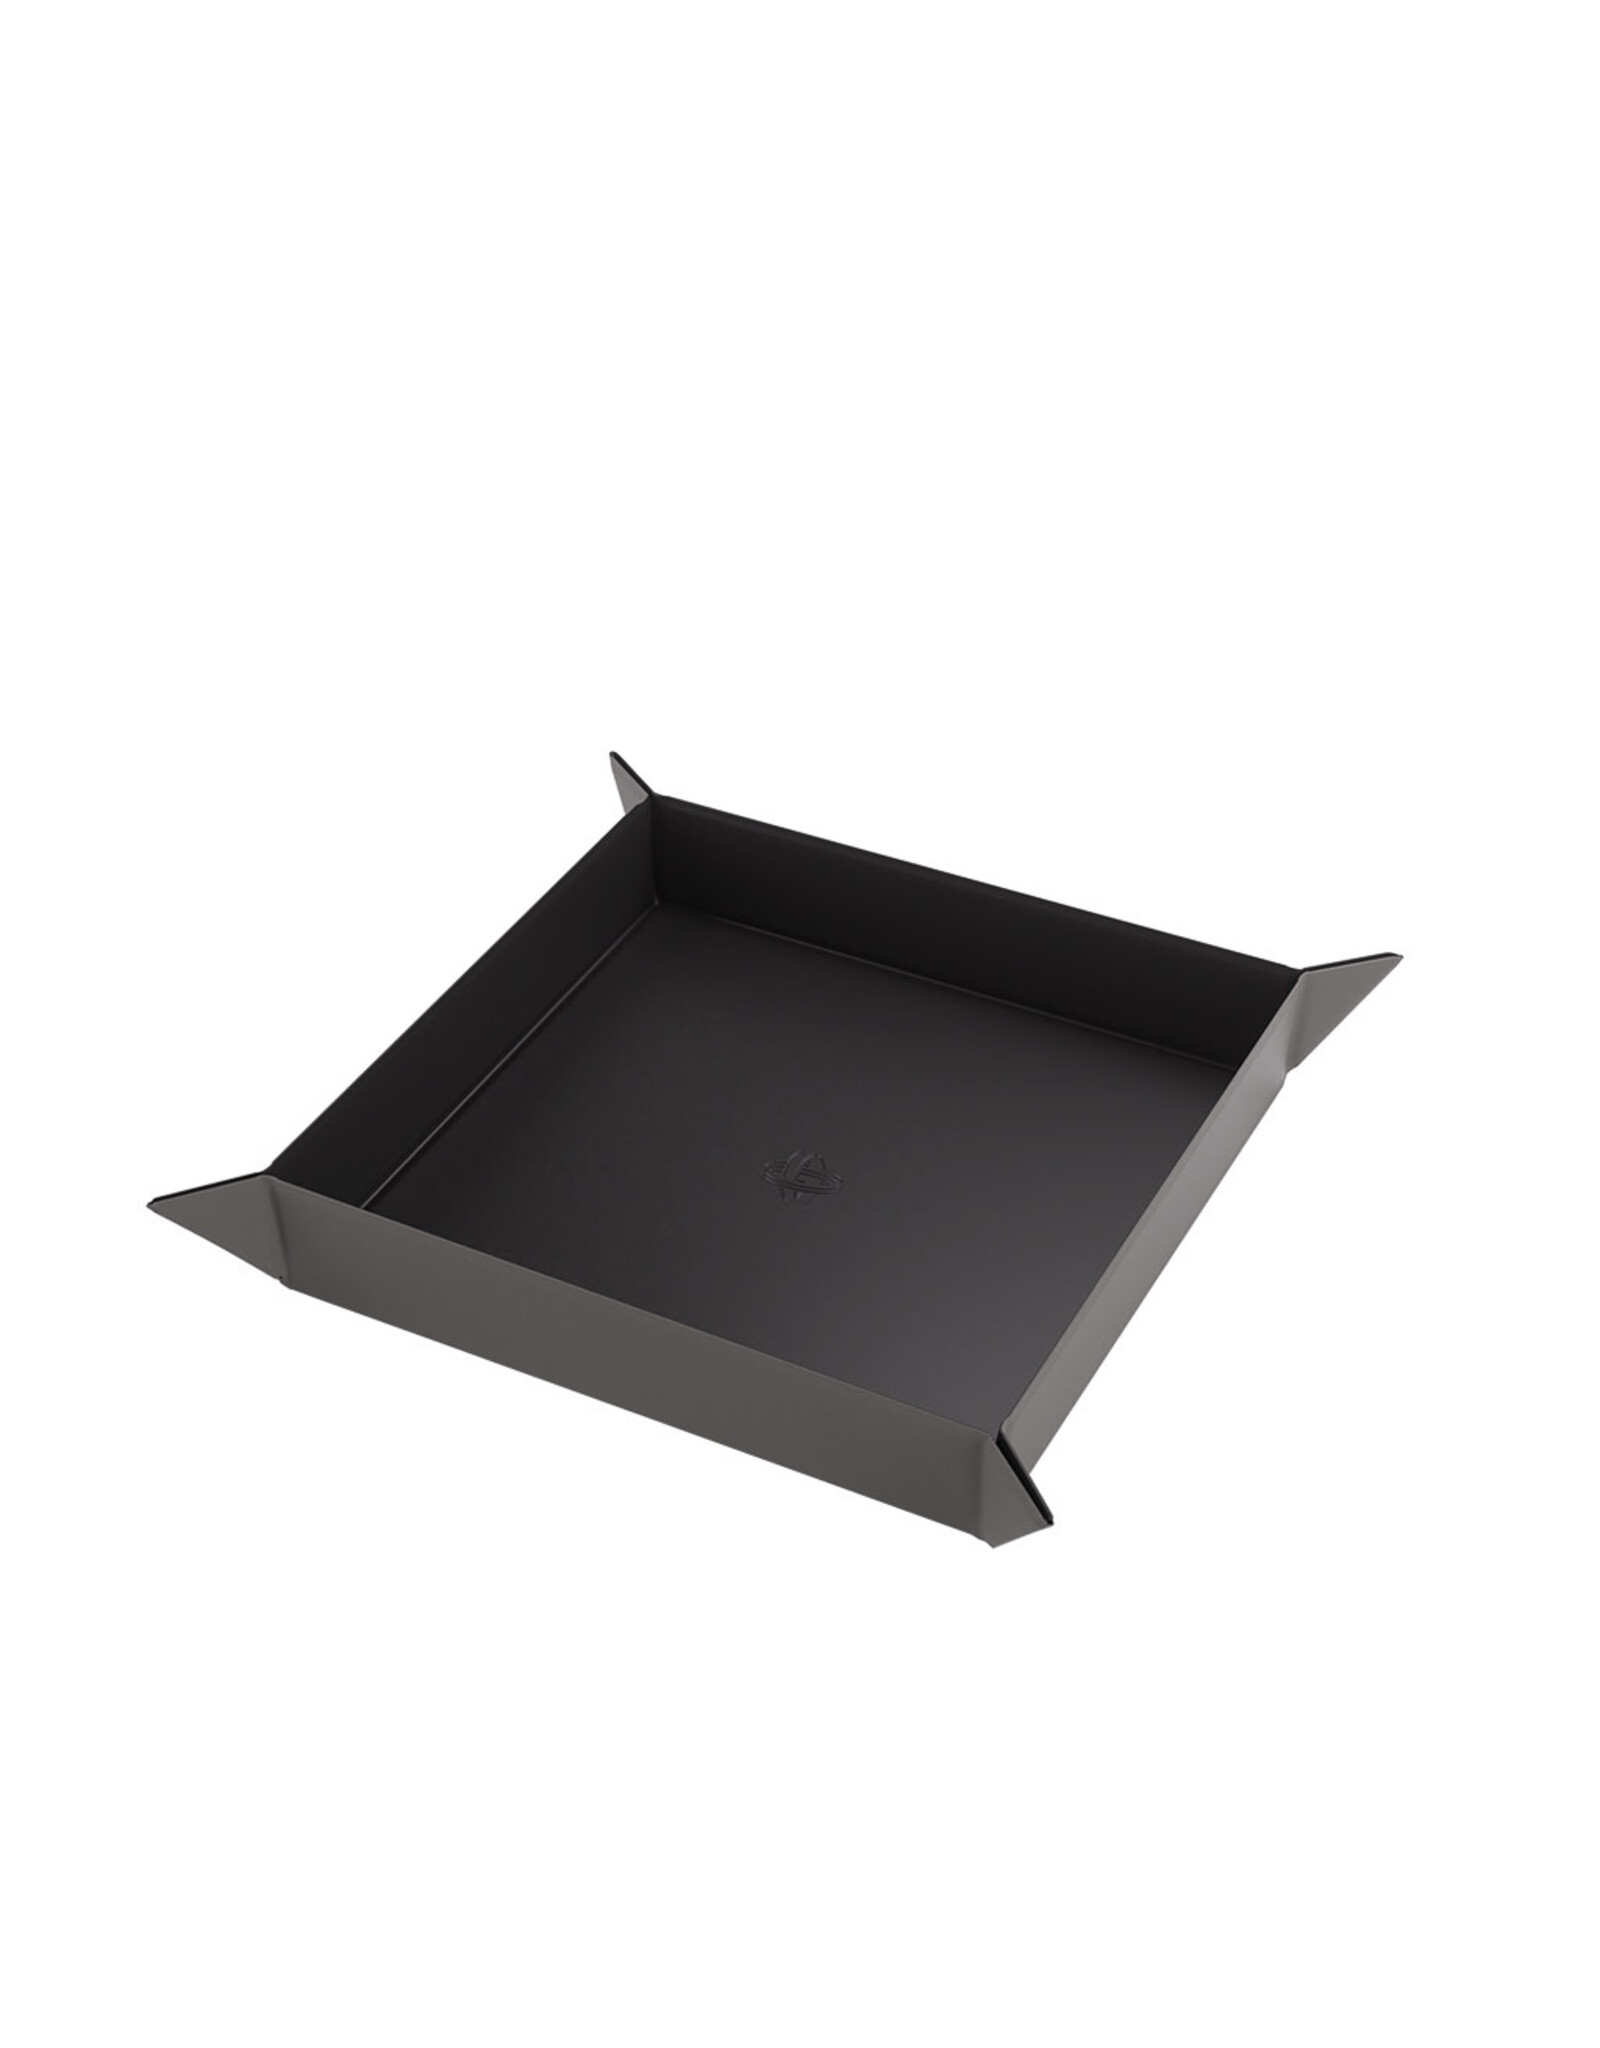 Gamegenic Gamegenic  Magnetic Dice Tray Square Black/Grey